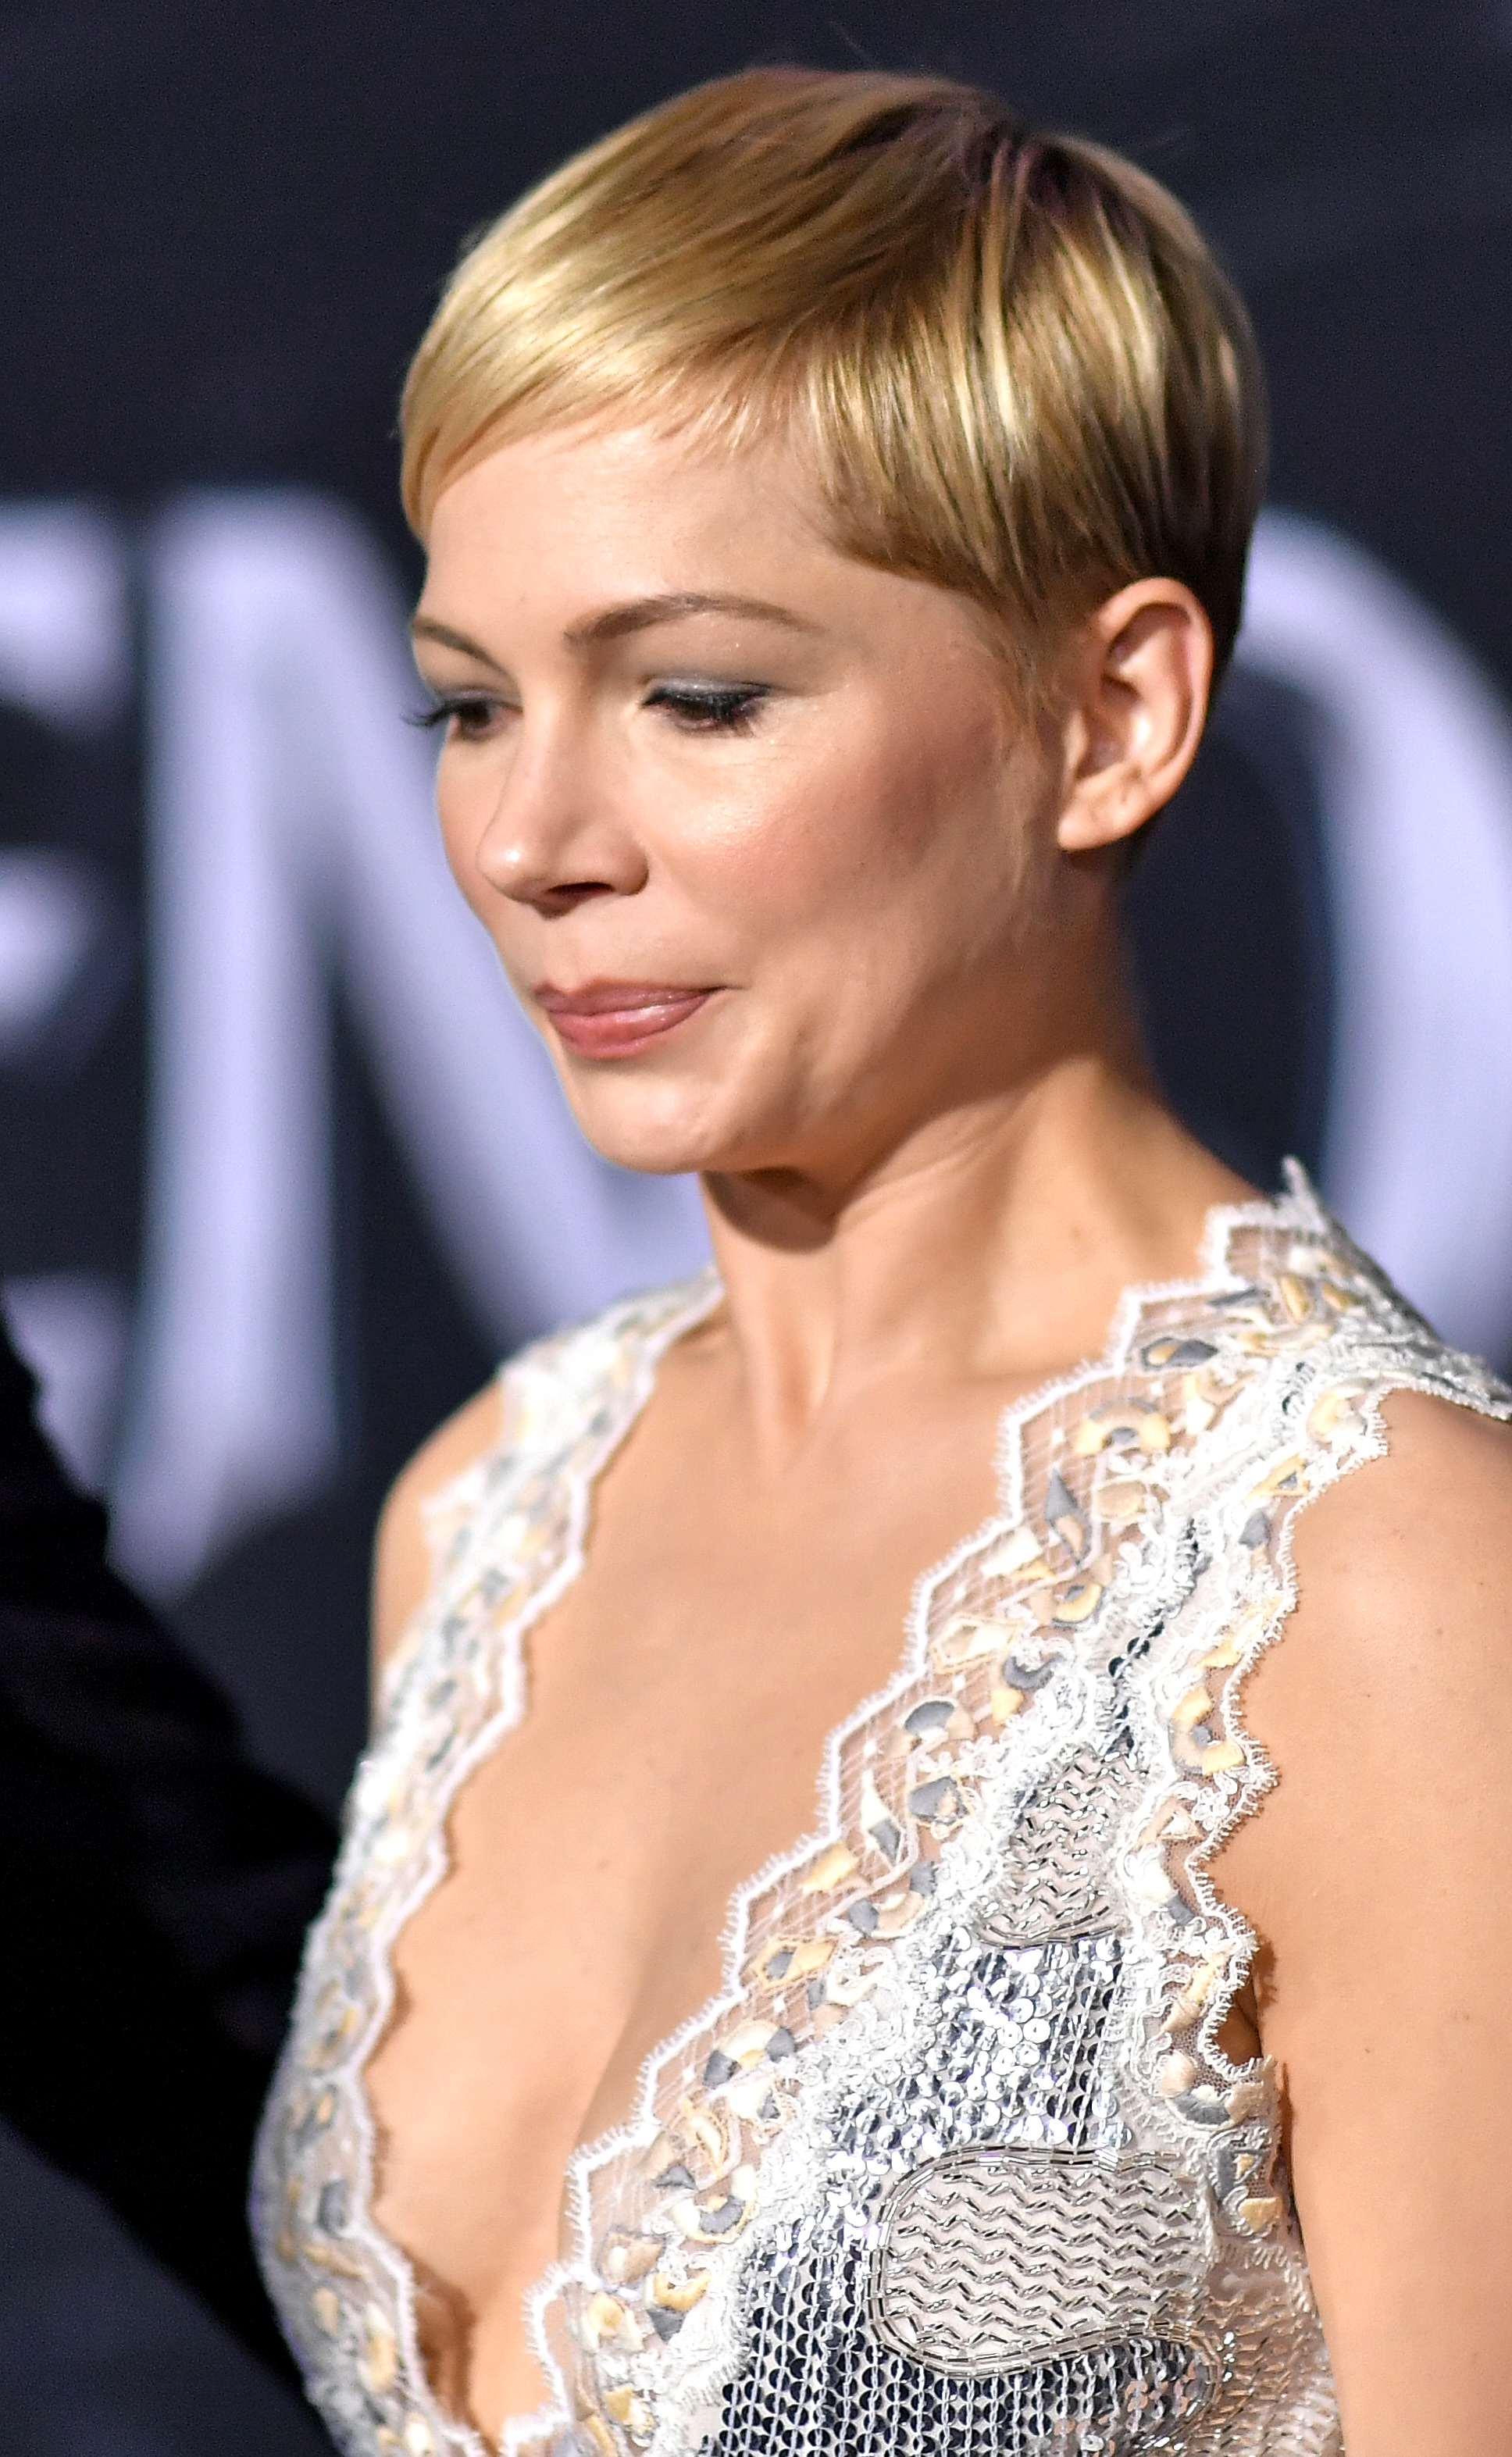 Oh Look at That. Michelle Williams' Hair Is Growing Out Nicely. - Racked